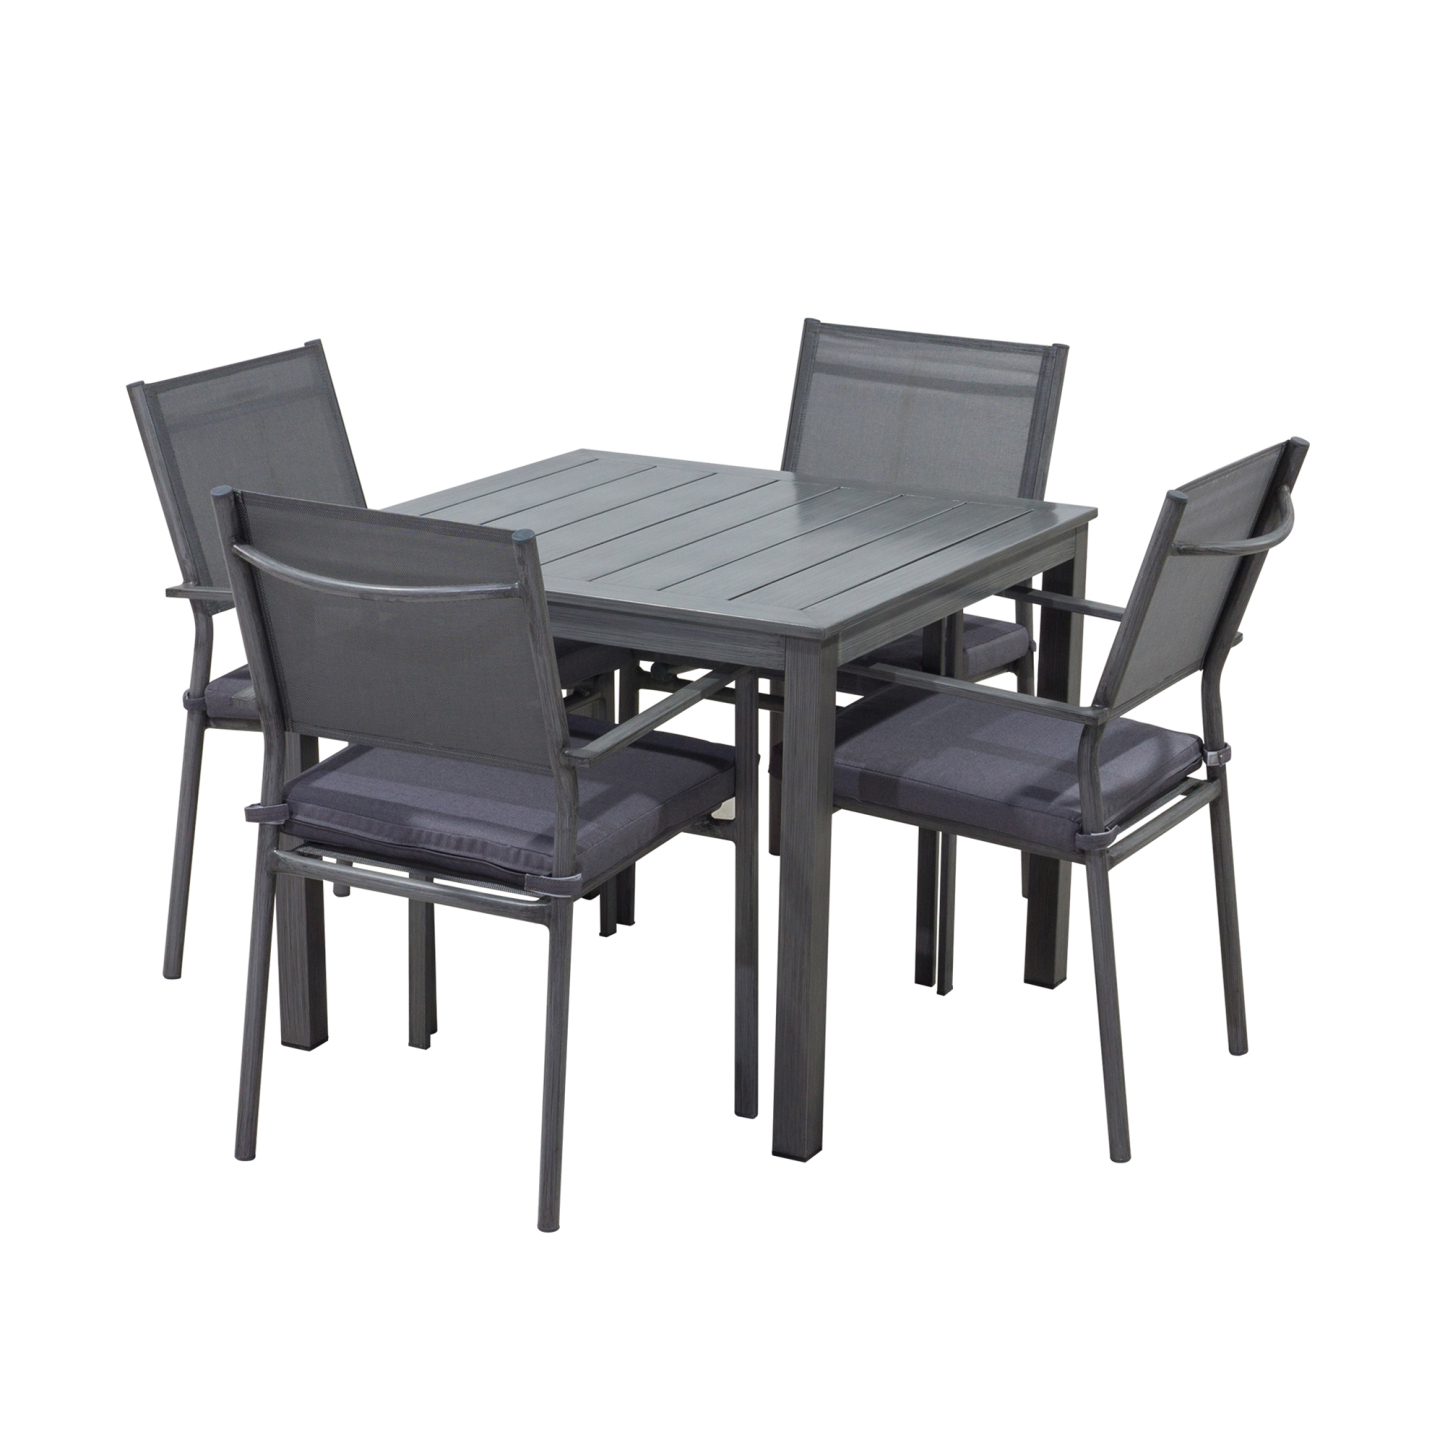 Mondawe 5-Piece Outdoor Patio Aluminum Swivel Chair Dining Set with Table in Gray-Mondawe